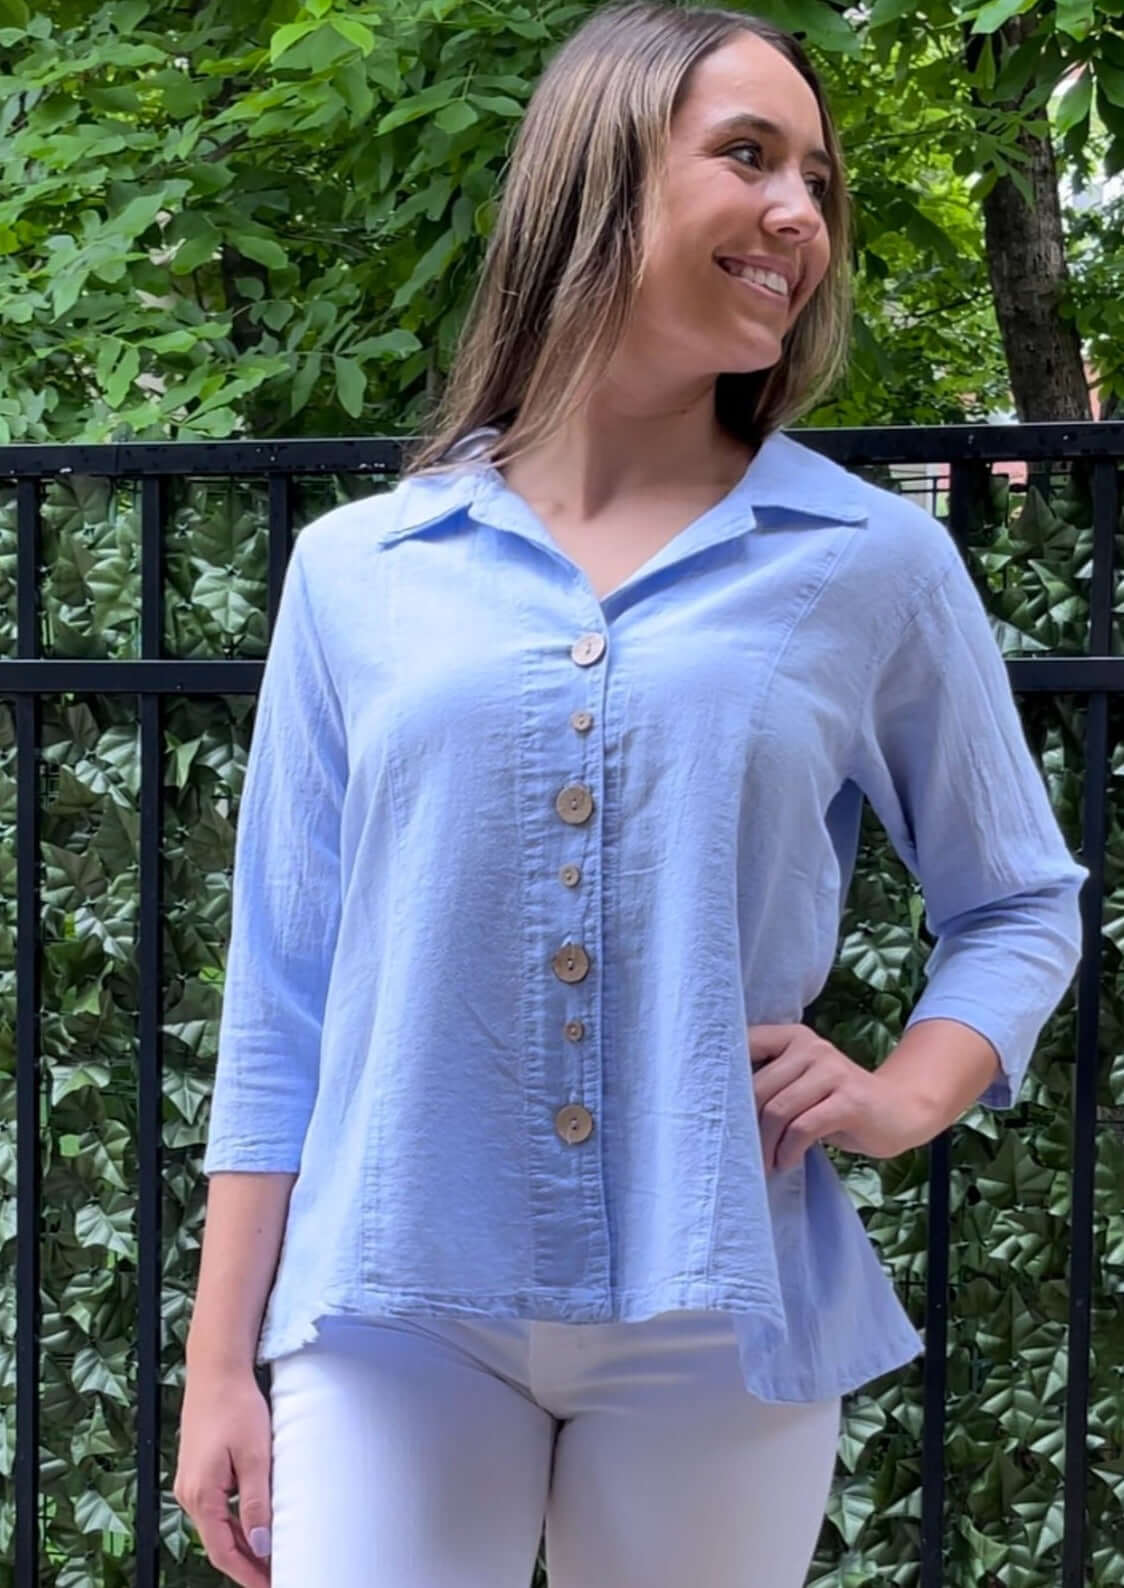 Made in USA Classy Women's 100% USA Cotton Button Down Ladies Top with Alternating Button Sizes in Serenity Blue | Classy Cozy Cool Women's Made in America Boutique